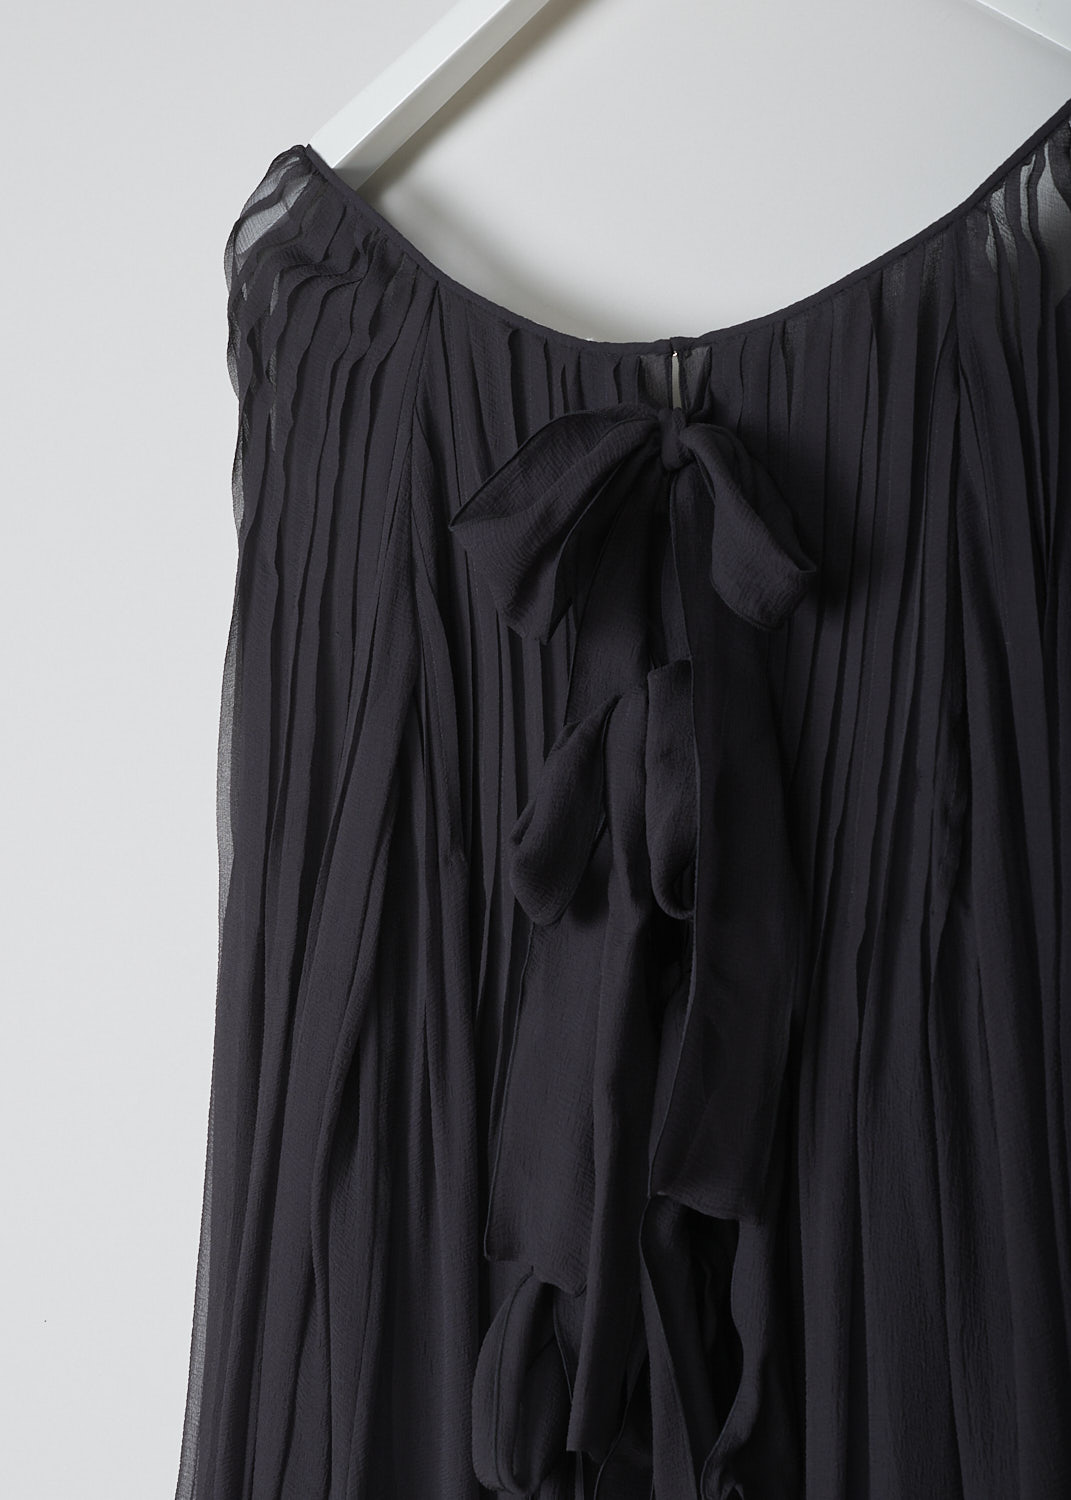 CHLOÃ‰ FLOWY ASH BLACK DRESS, CHC23SRO77101070_070, Black, Grey, Detail, This ash black silk midi dress has a wide round neckline. The long semi sheer sleeves have gathered cuffs. The dress has a slip dress sewn in under the flowy sheer silk fabric. In the back, a hook-and-eye and four ties function as the closure. 
